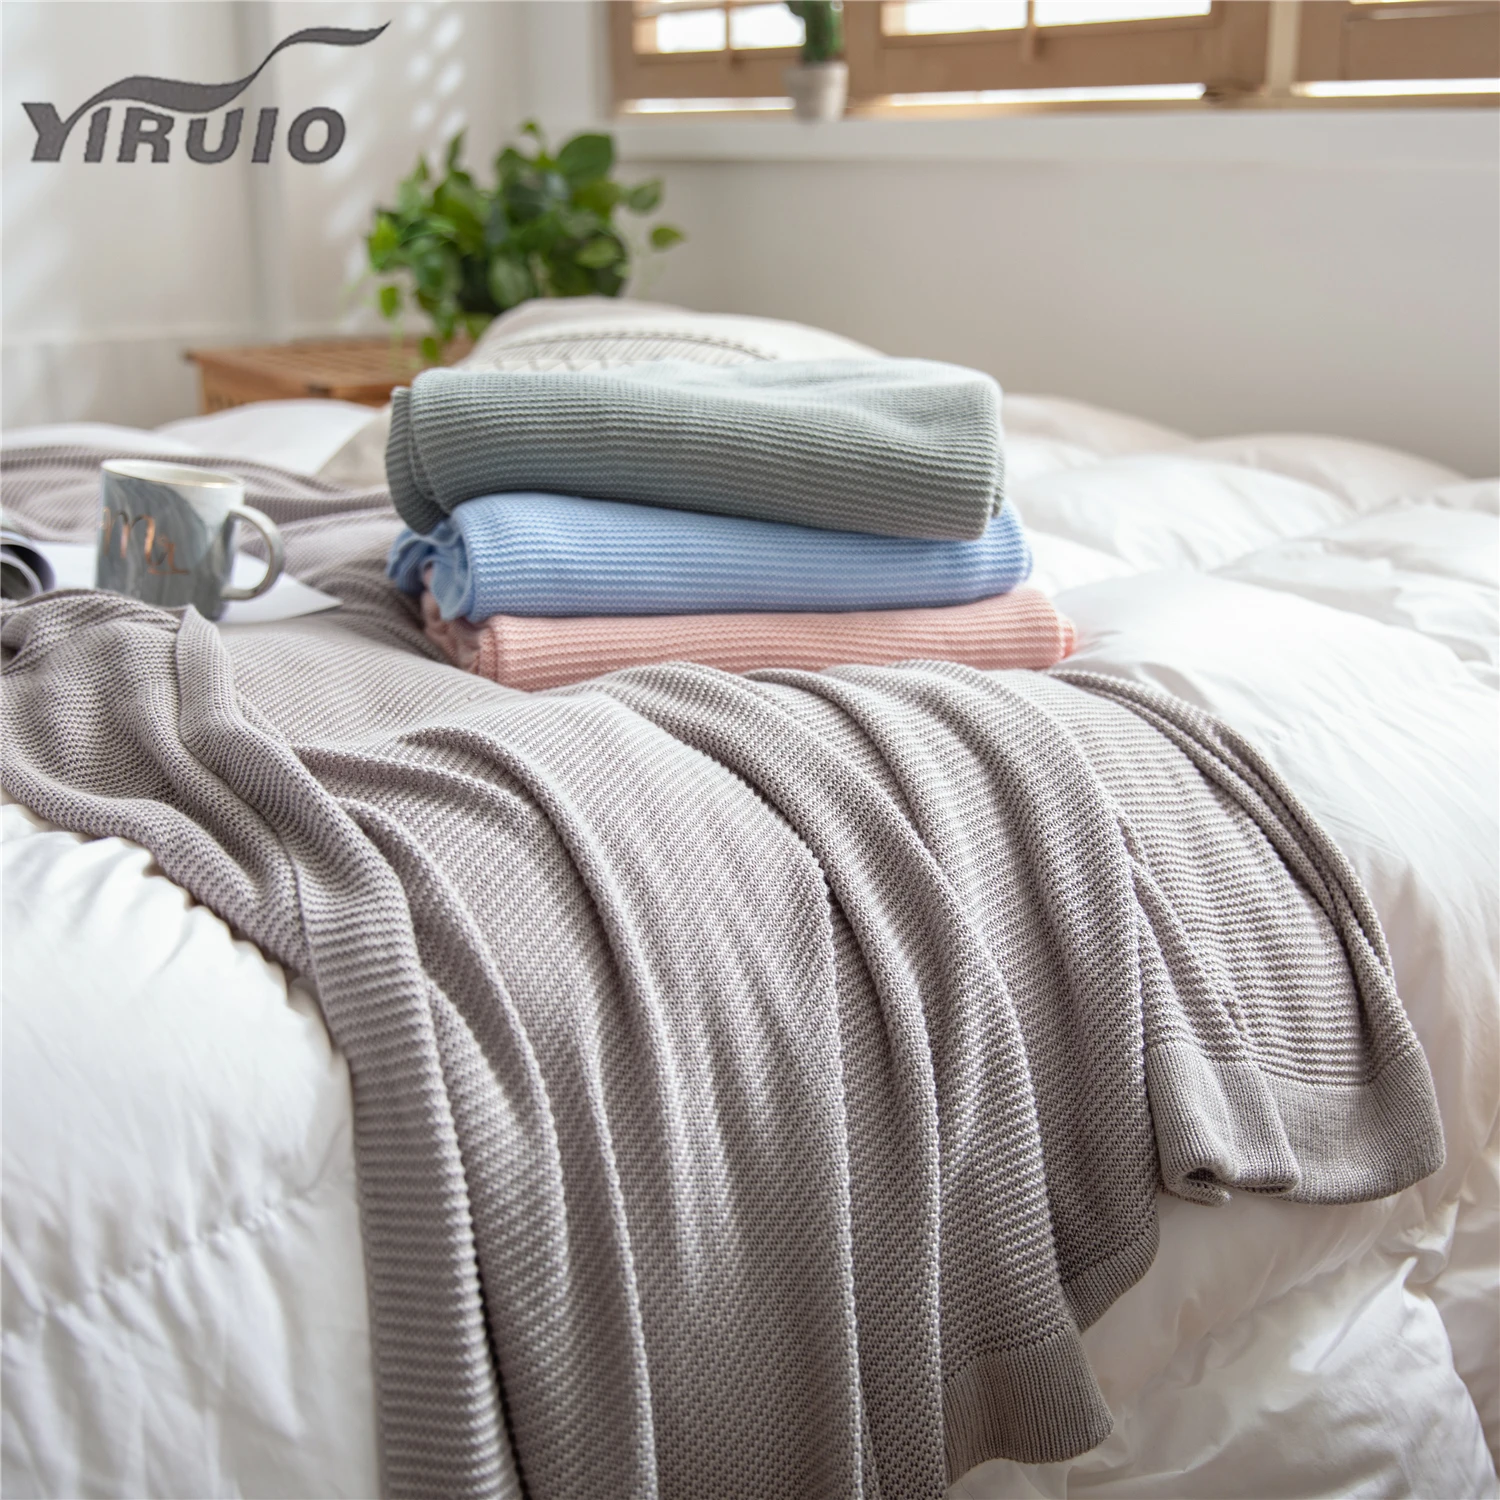 

YIRUIO Summer Cooling Bamboo Knitted Blanket Army Green Gray Blue Pink Cable Knit Breathable Air Conditioning Room Bed Nap Quilt